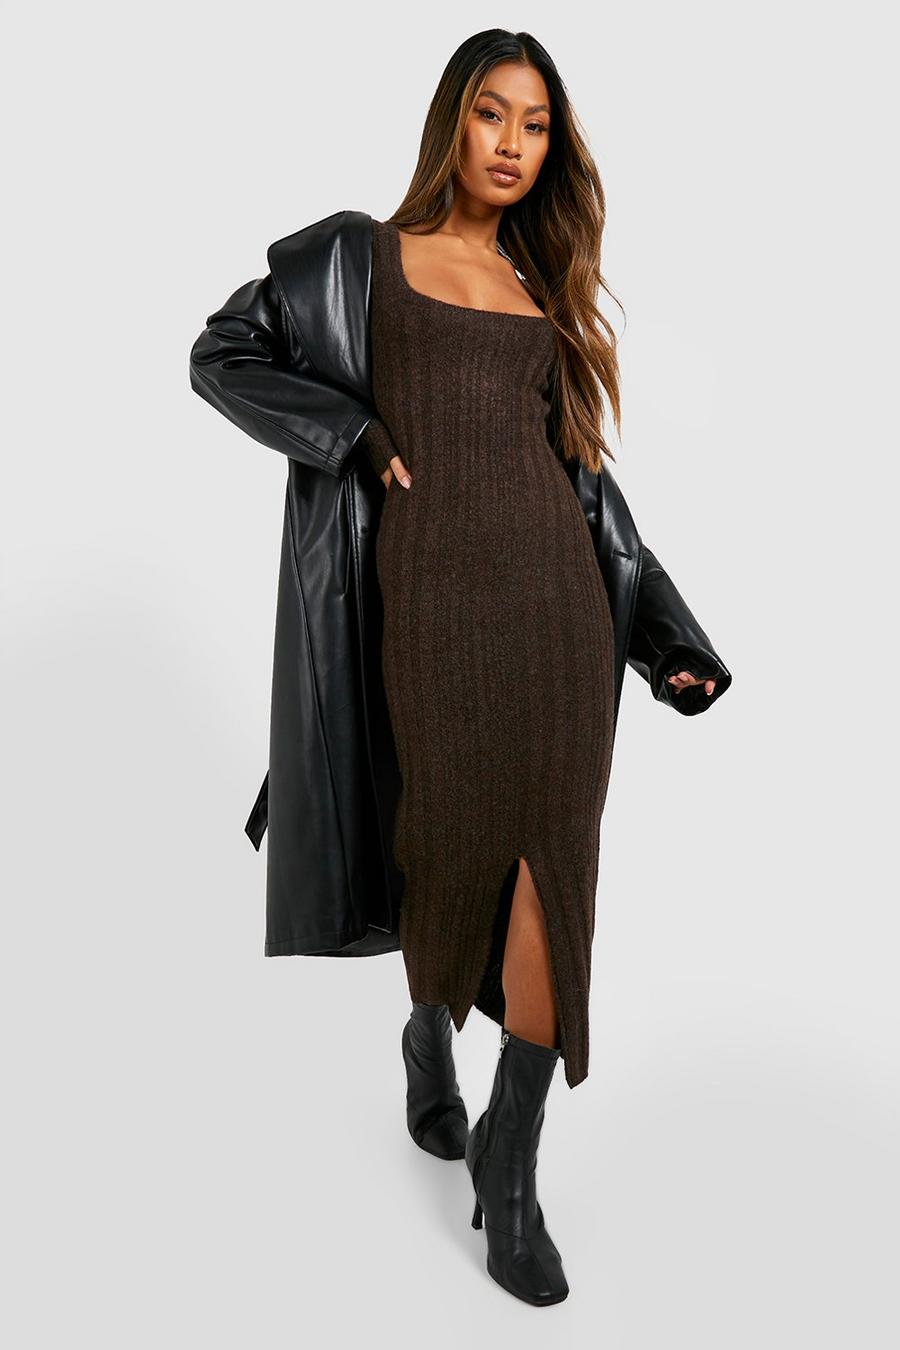 Chocolate brown Square Neck Mixed Rib Knitted Midaxi Dress